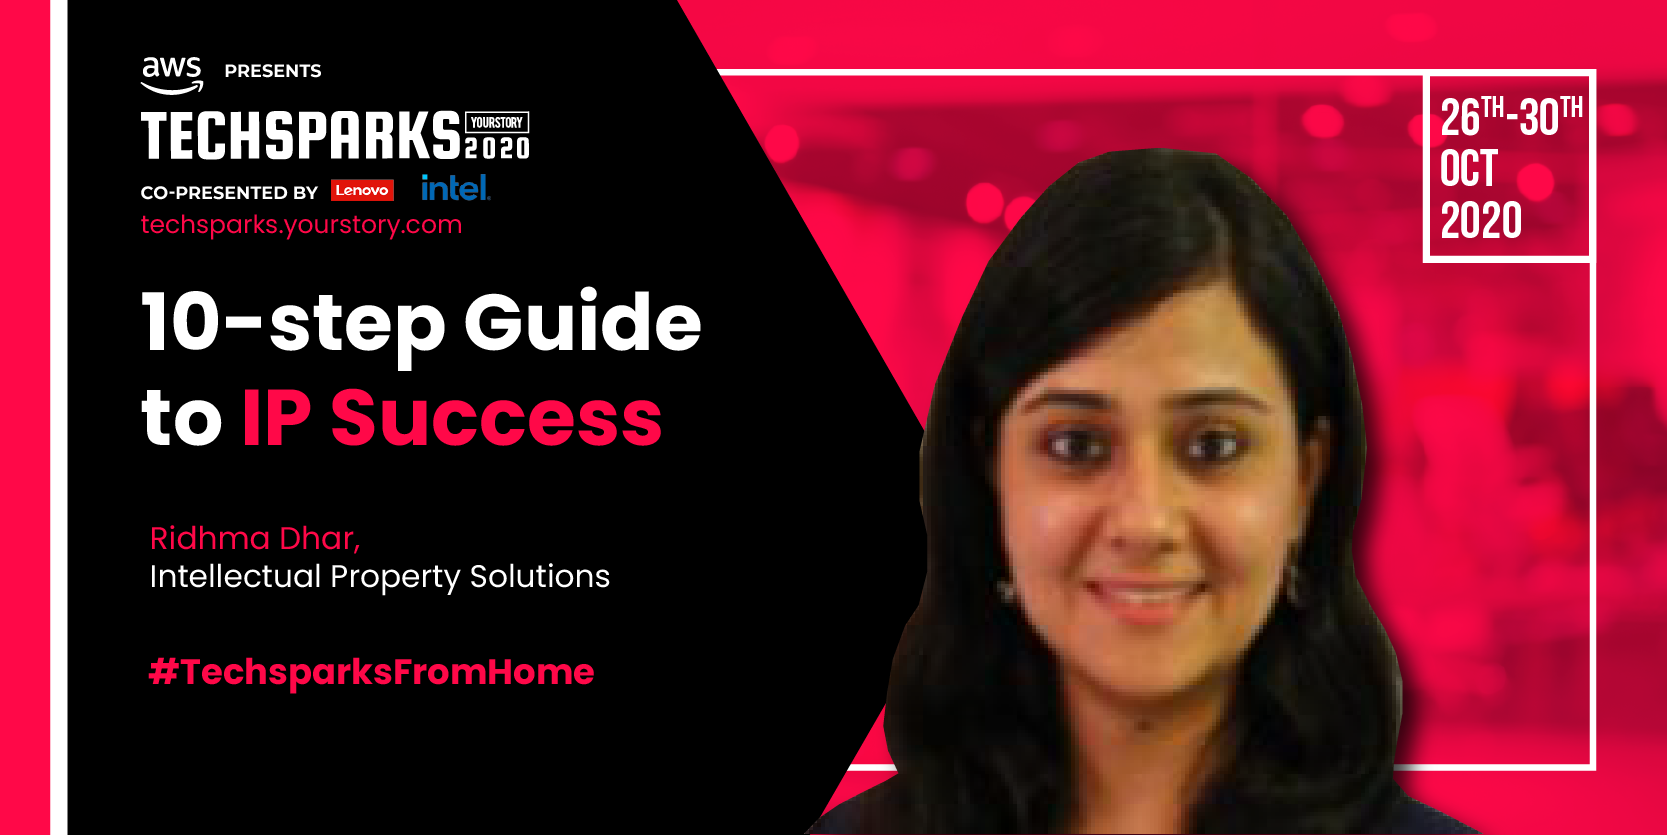 Ridhma Dhar gives a 10-step guide to IP success at TechSparks 2020